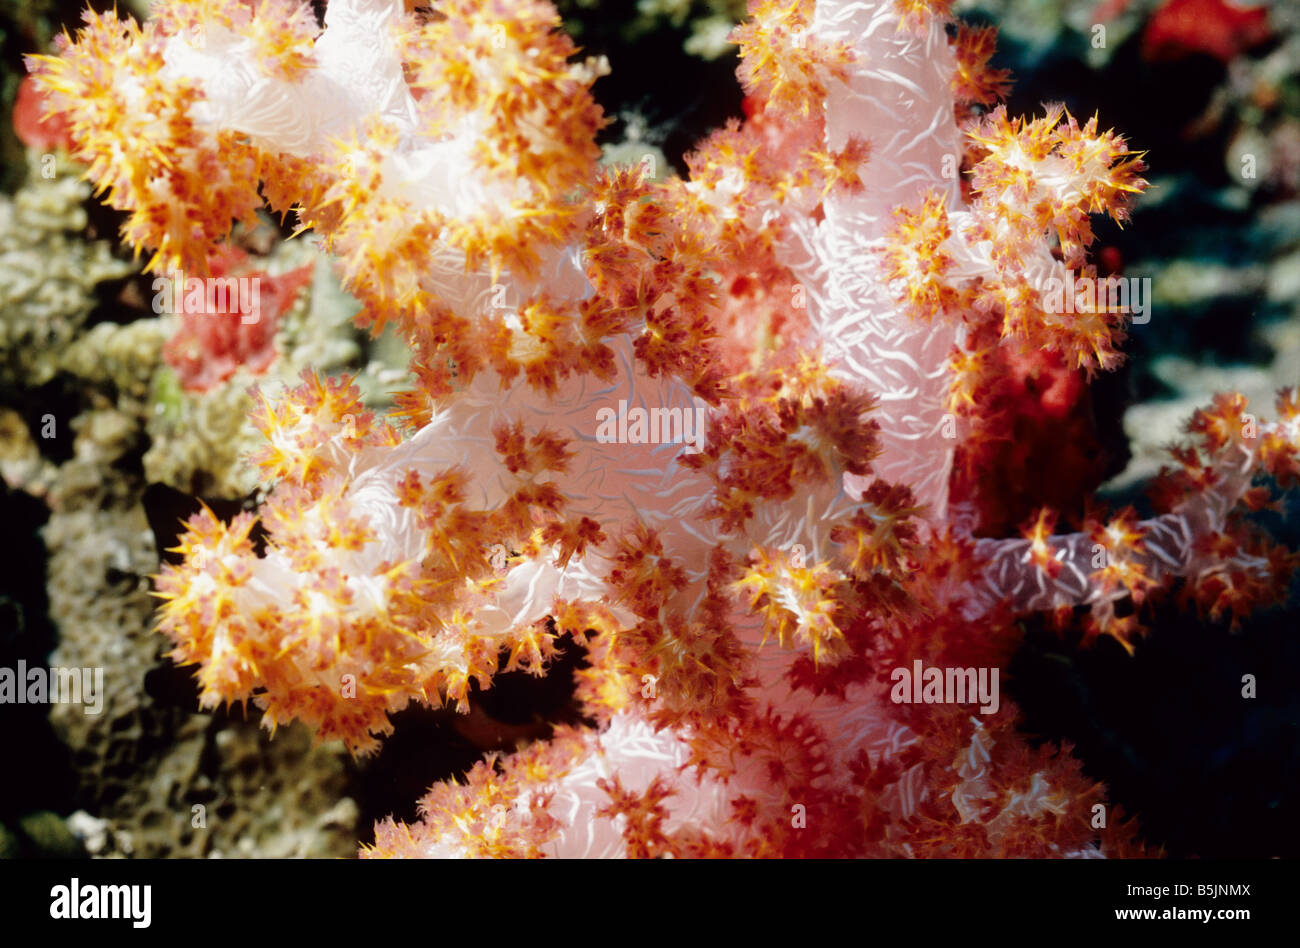 Nephtheidae. Soft Coral. Orange Spiky Soft Coral. Dendronephthya sp. Soft Corals in the Maldives. Marine life of the Maldives. Stock Photo